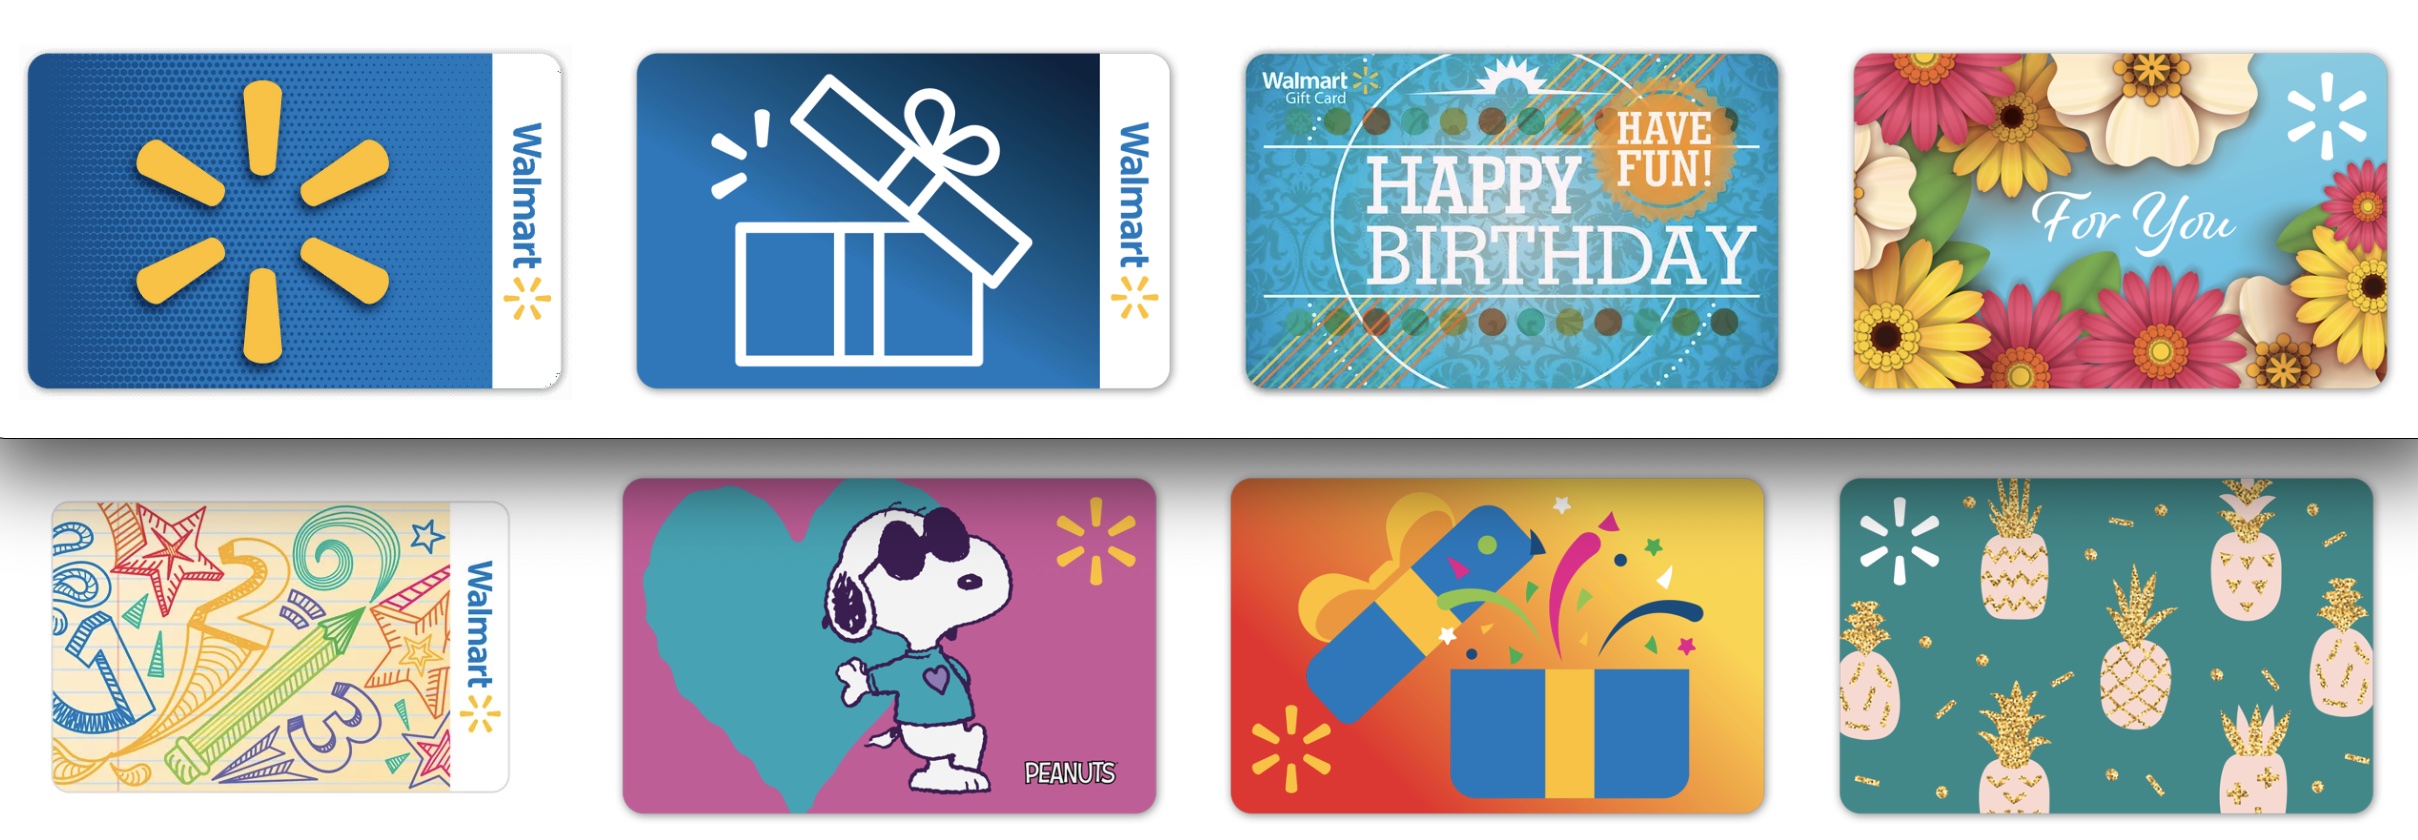 Can I Buy Gift Cards With a Walmart Gift Card?